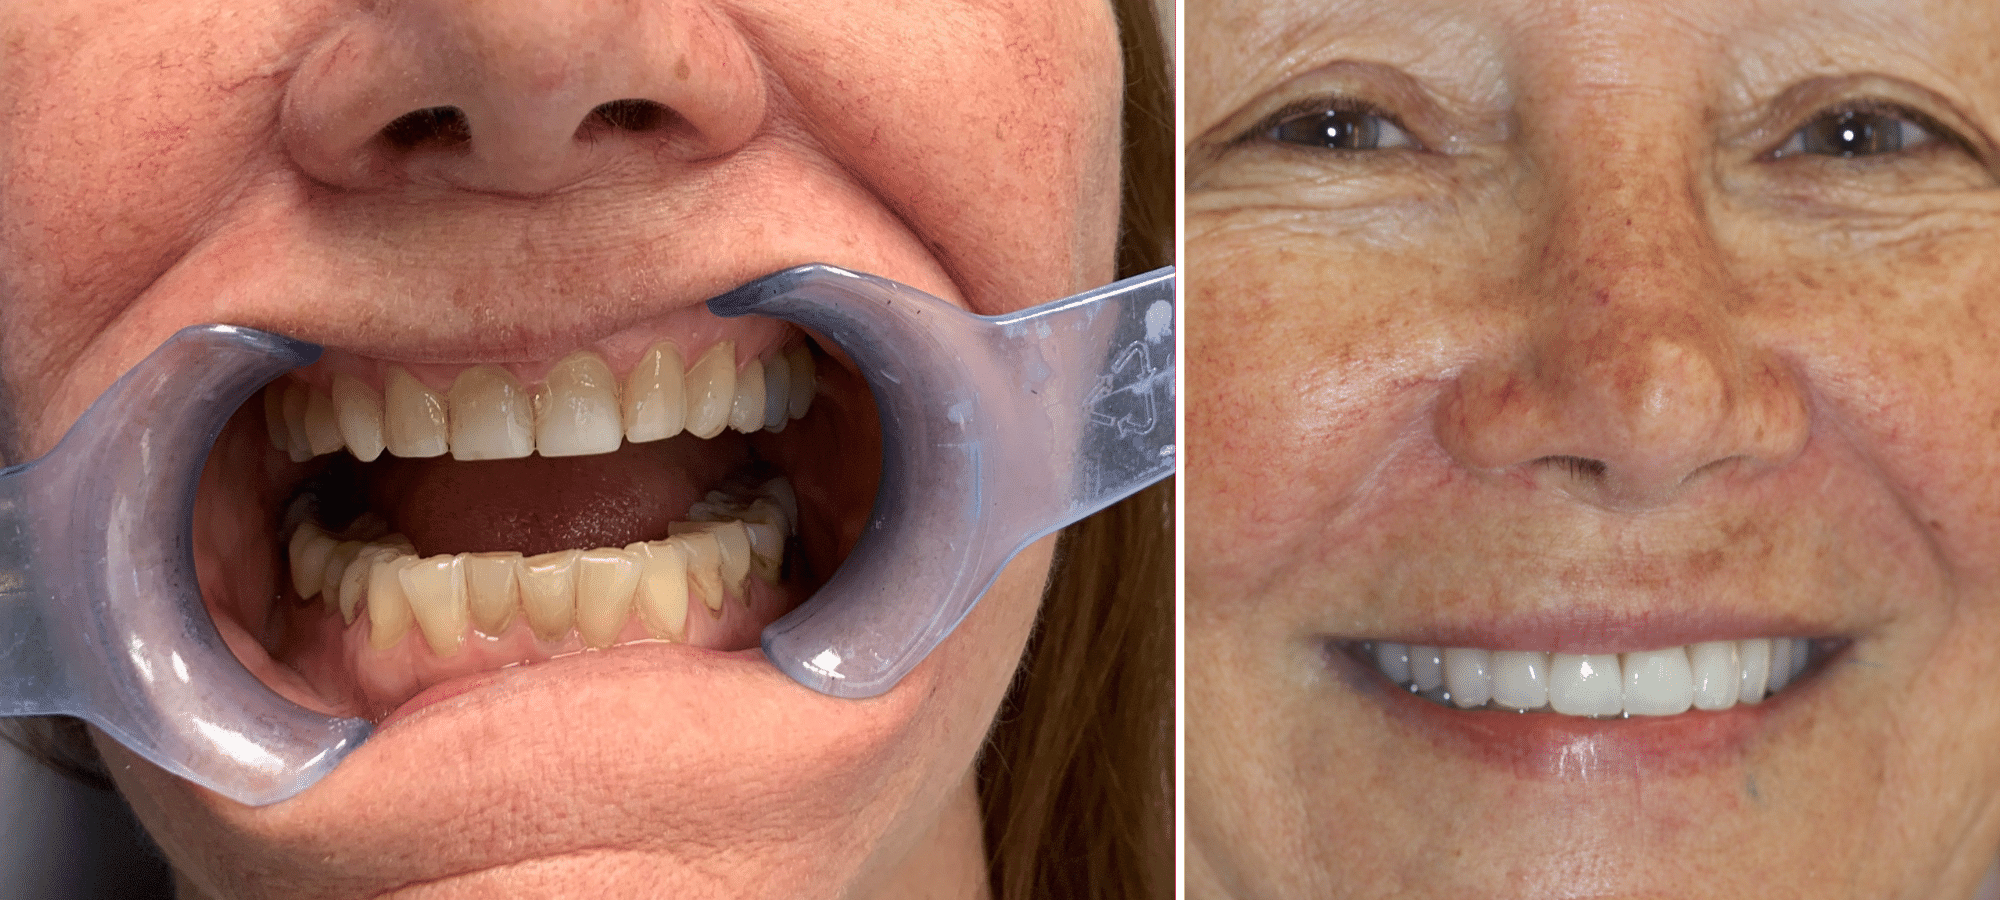 Veneers Before and After Process